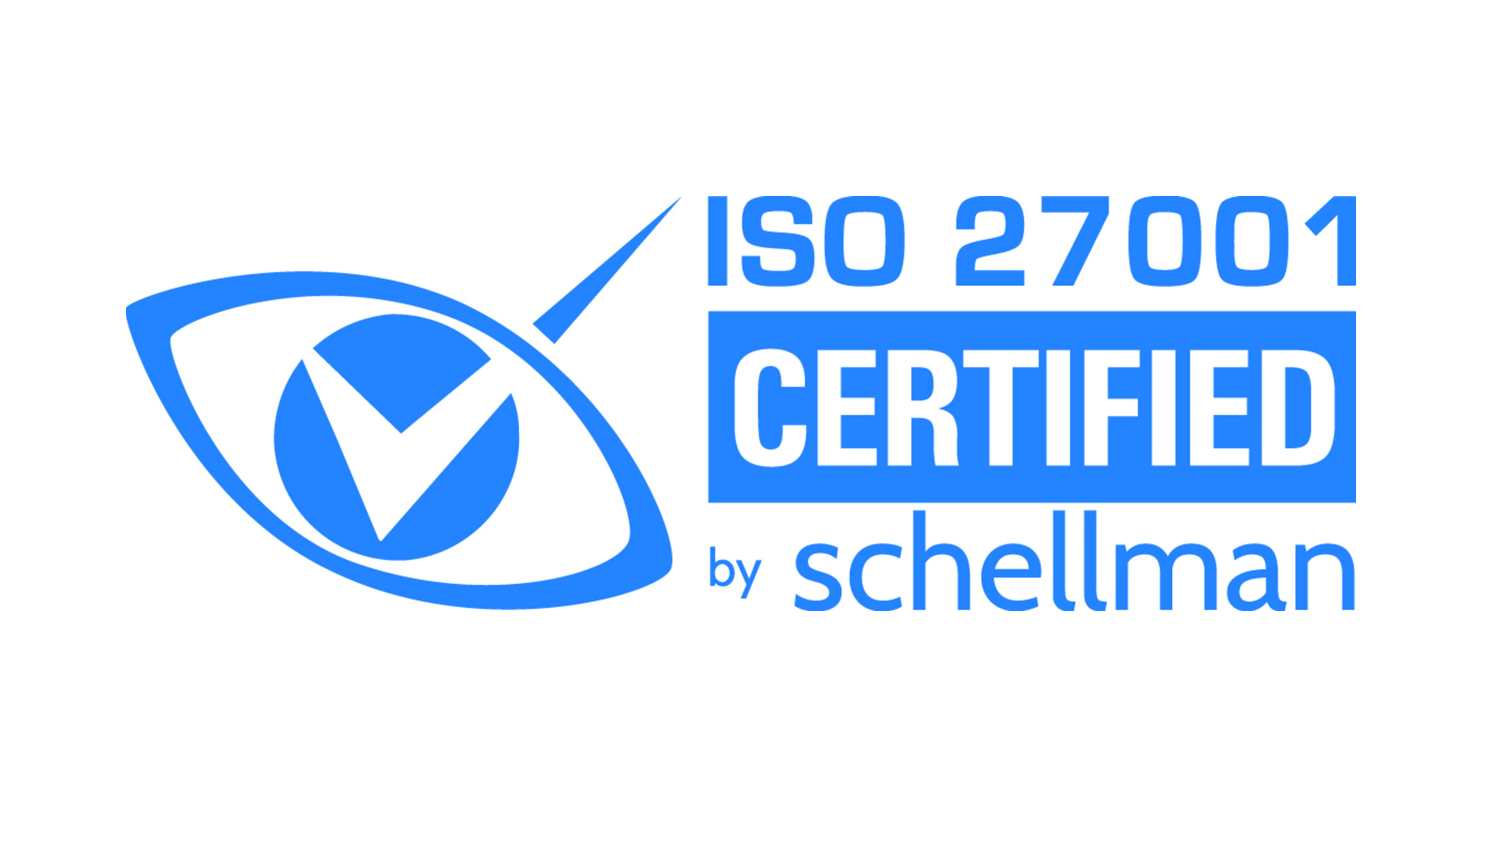 ISO 27001 certified by Schlumberger logo. Ensuring robust information security measures.